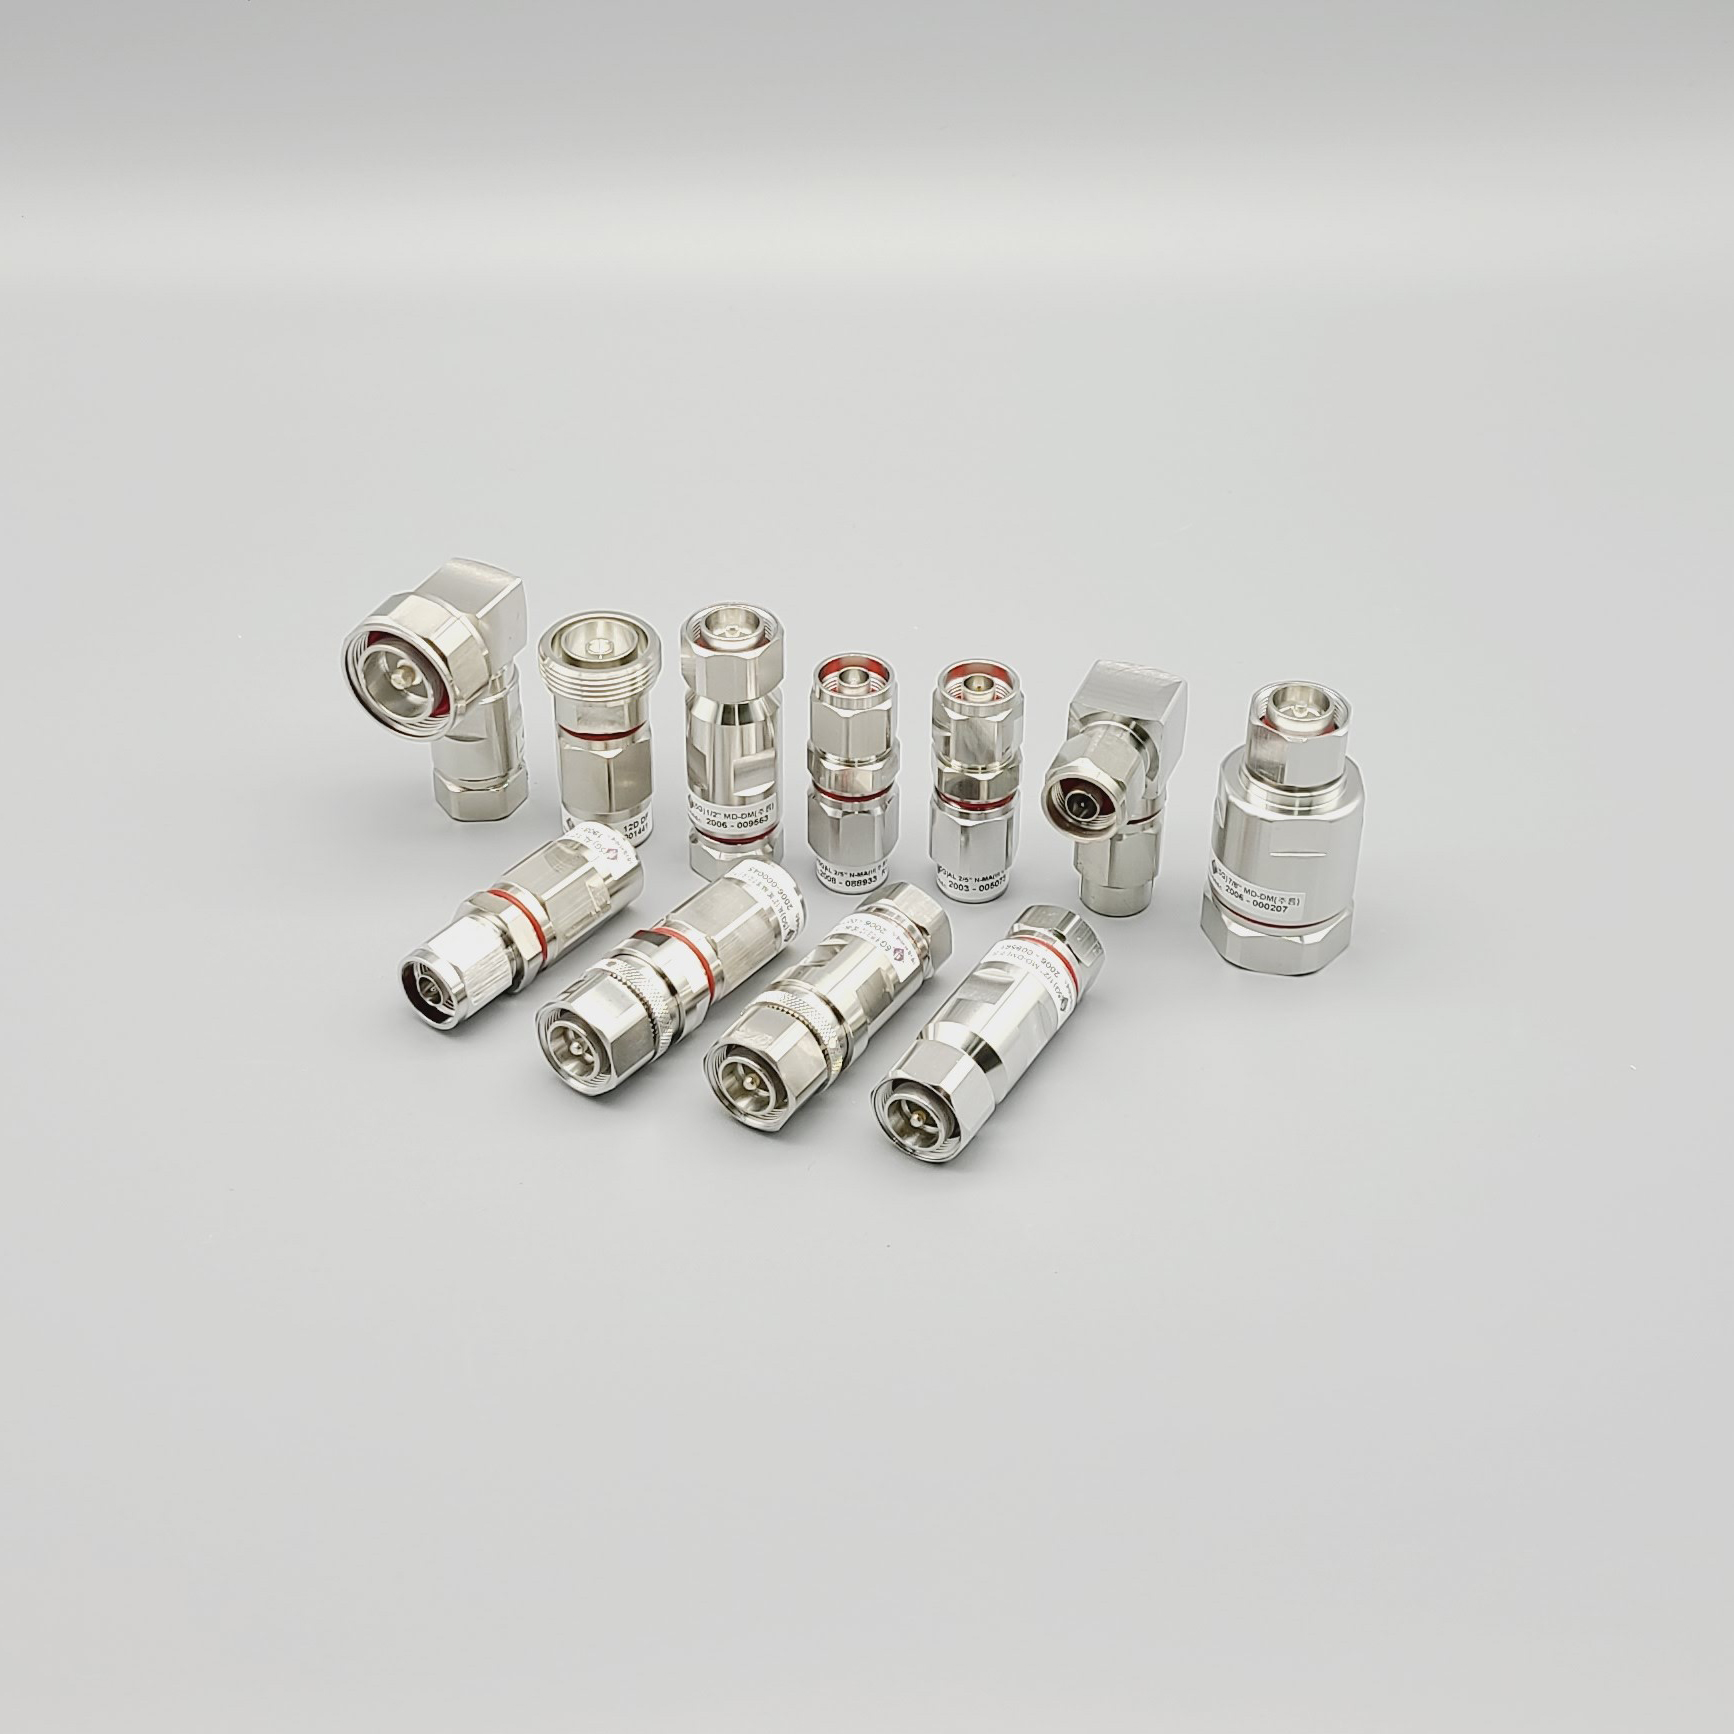 Connectors of UBCS Co., Ltd. are widely used in RF applications, and are mainly used in various busi...